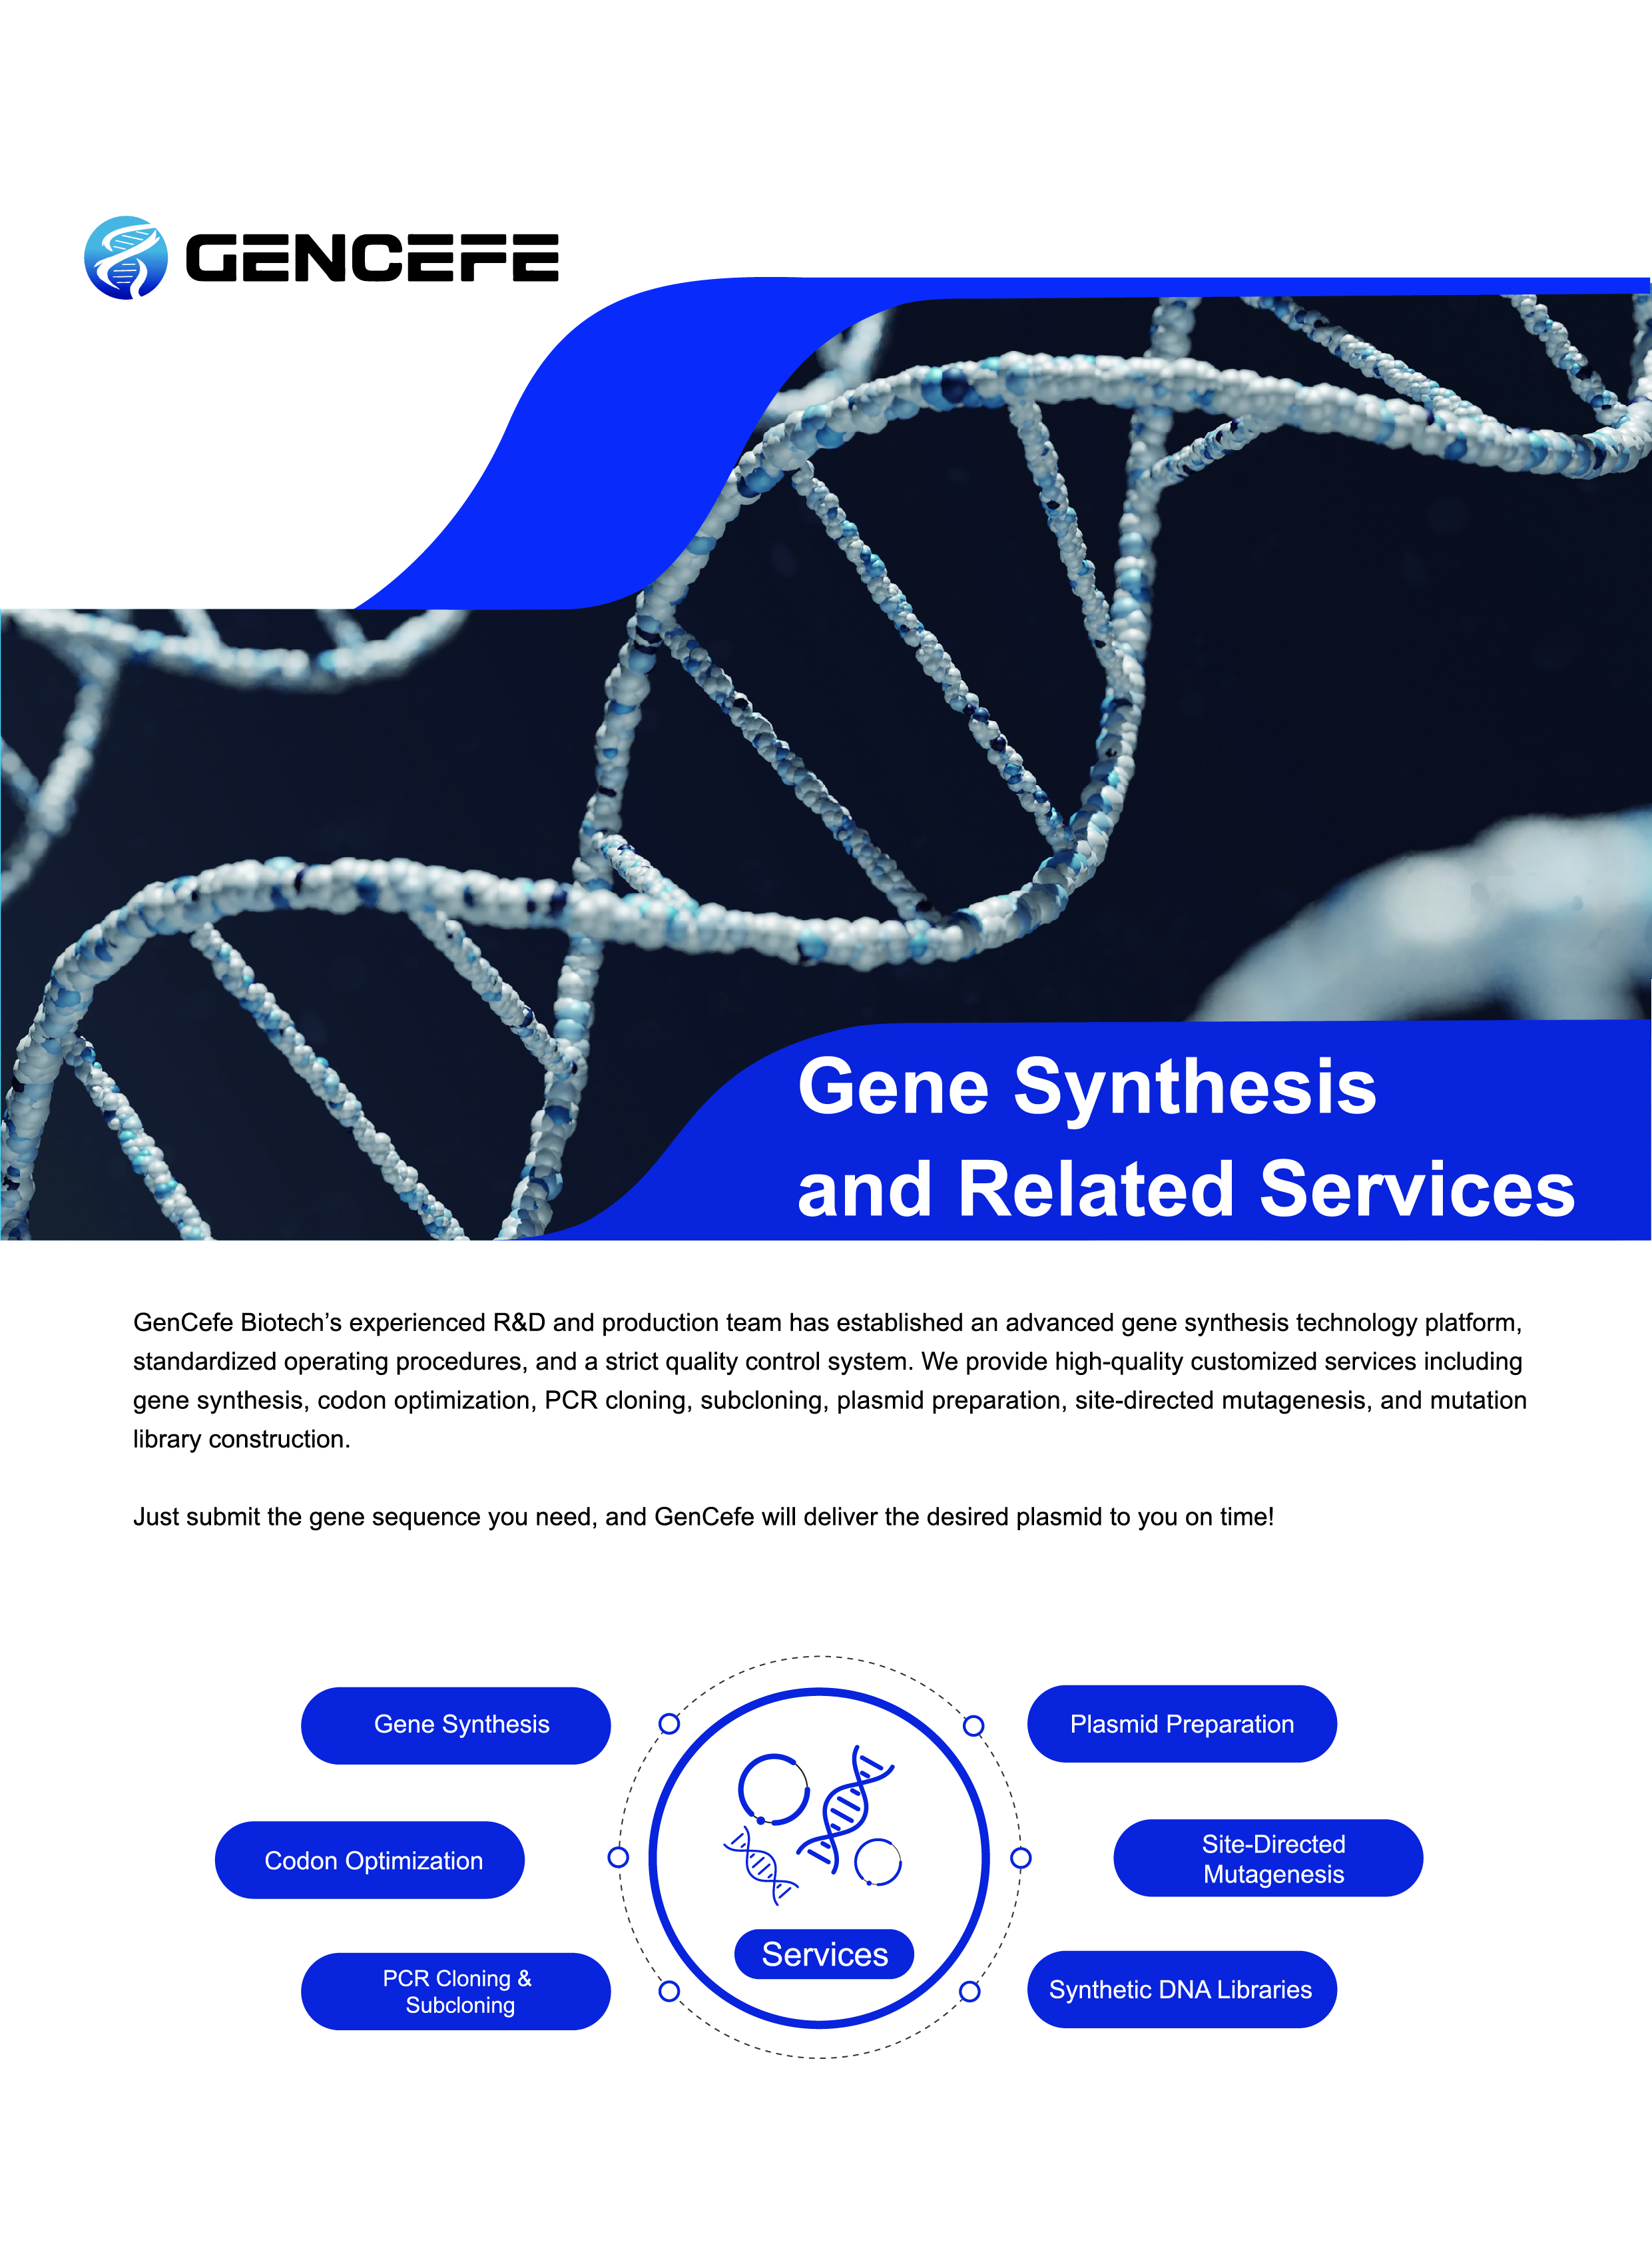 Gene Synthesis